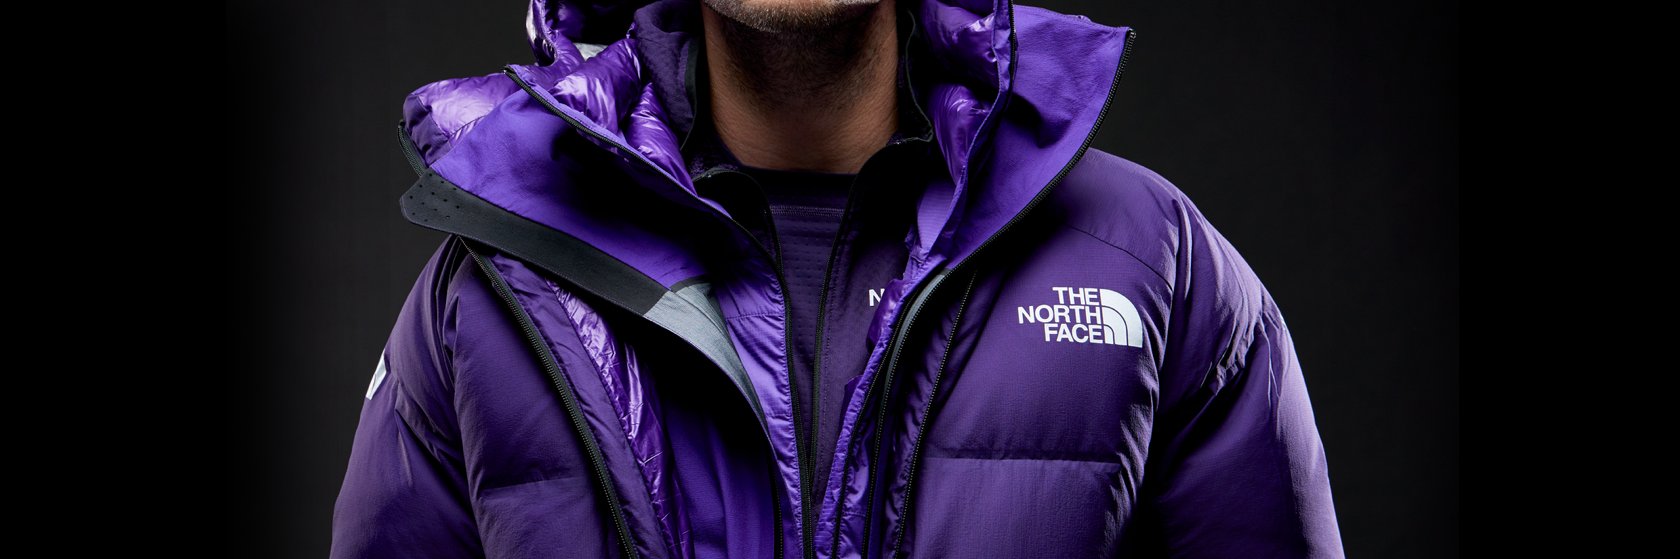 THE NORTH FACE  Mauntaineering Jacket